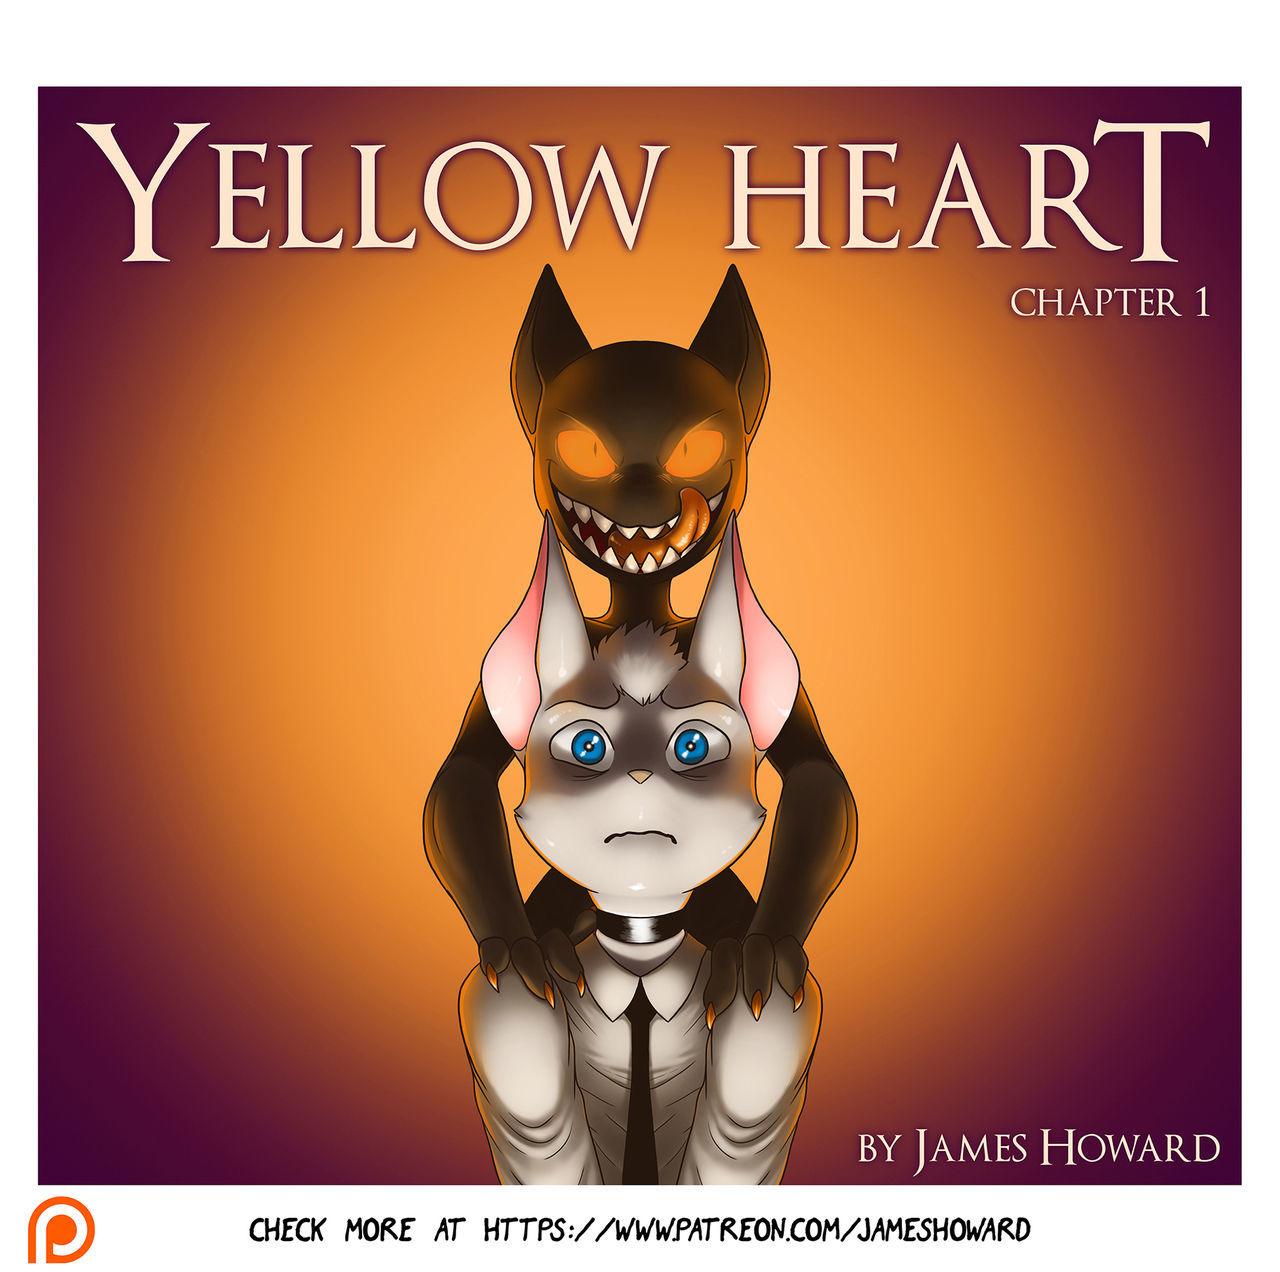 Yellow Heart - James Howard page 1